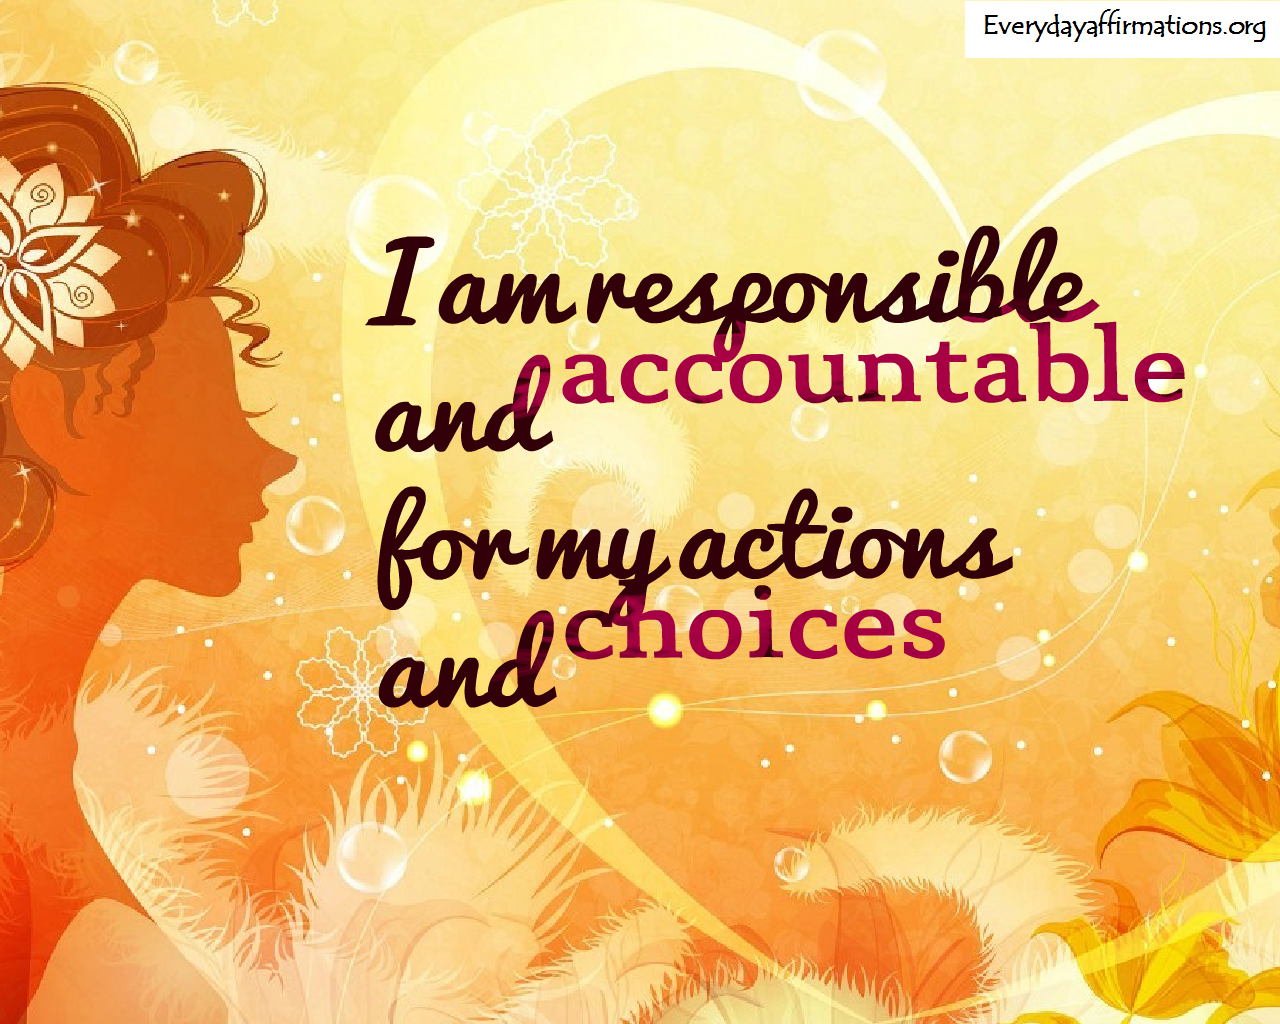 46 Affirmations for Women to assist through Meaningful 